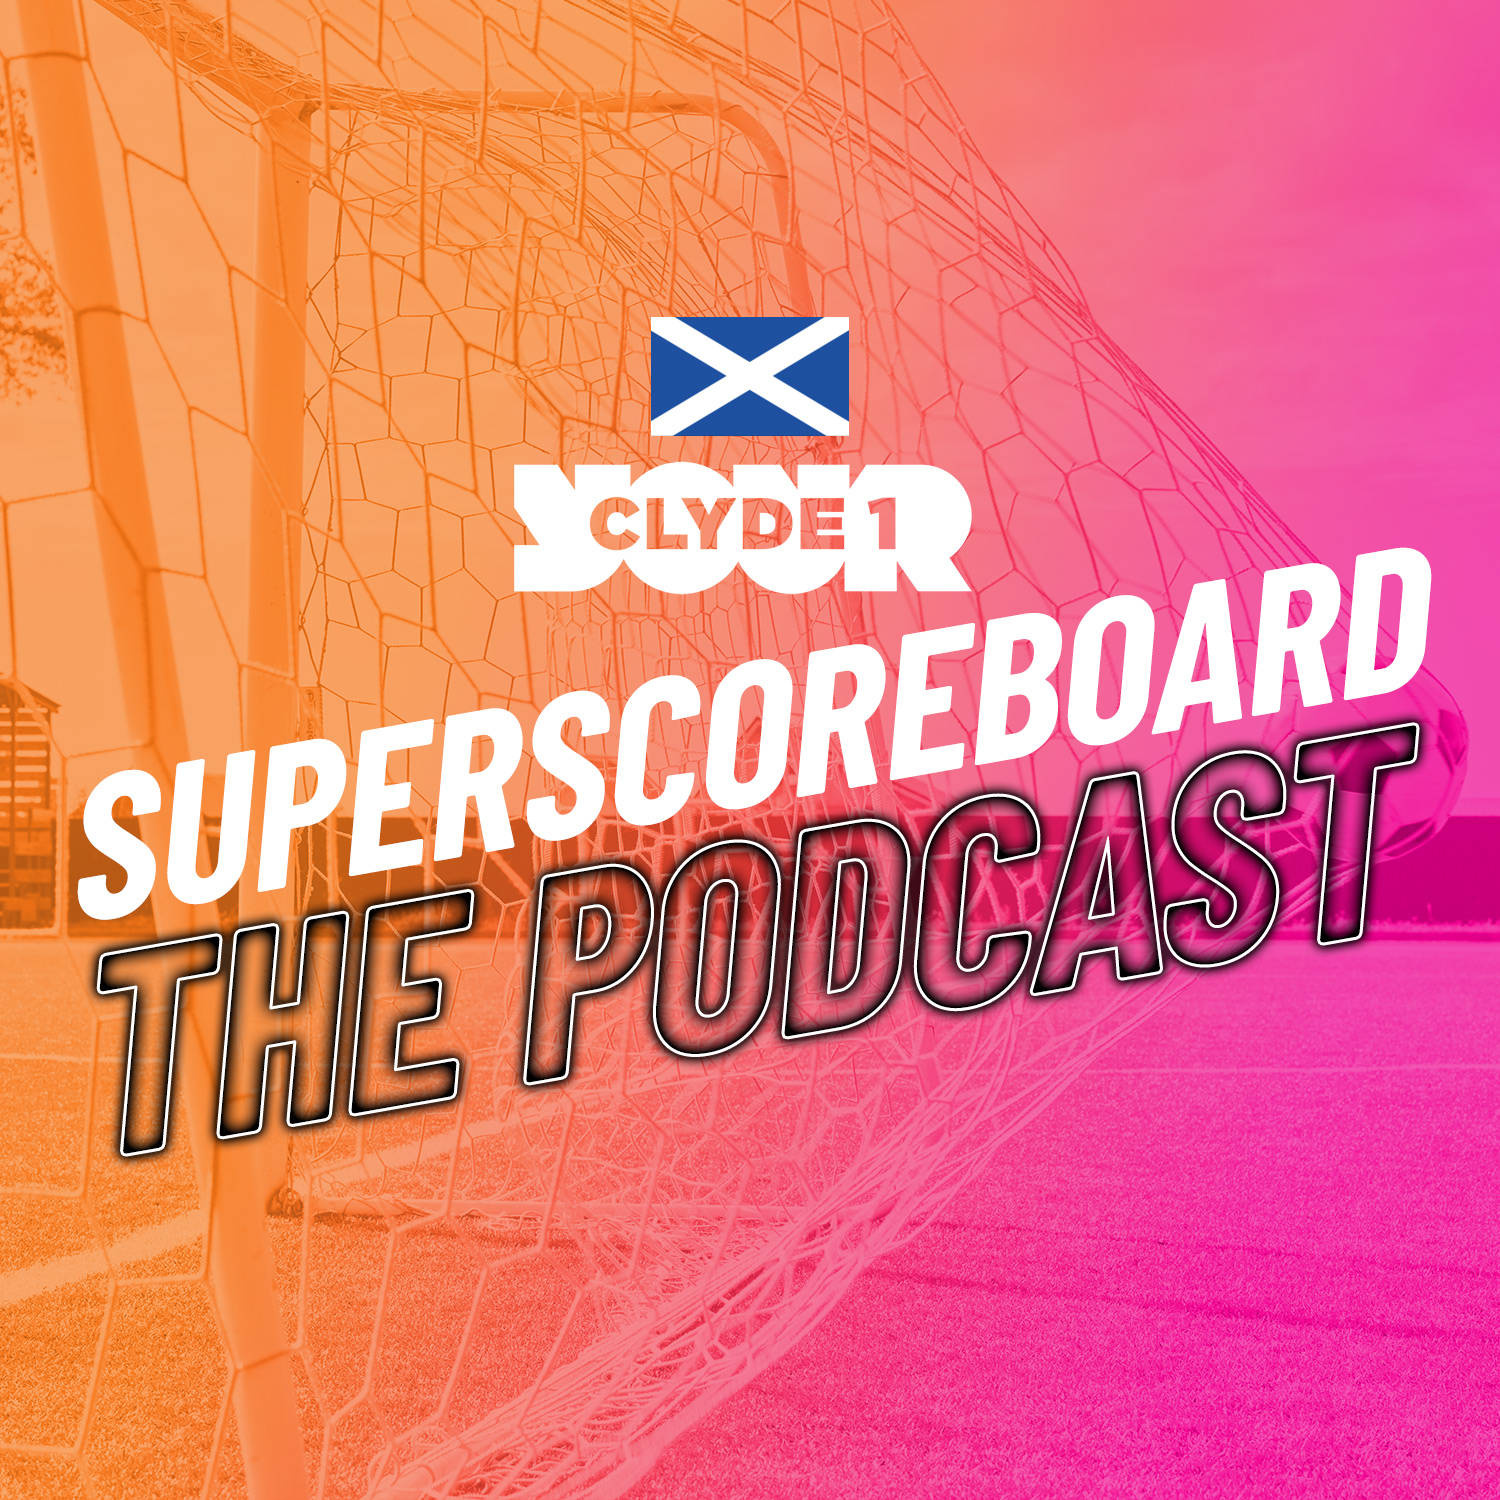 Tuesday 7th March Clyde 1 Superscoreboard